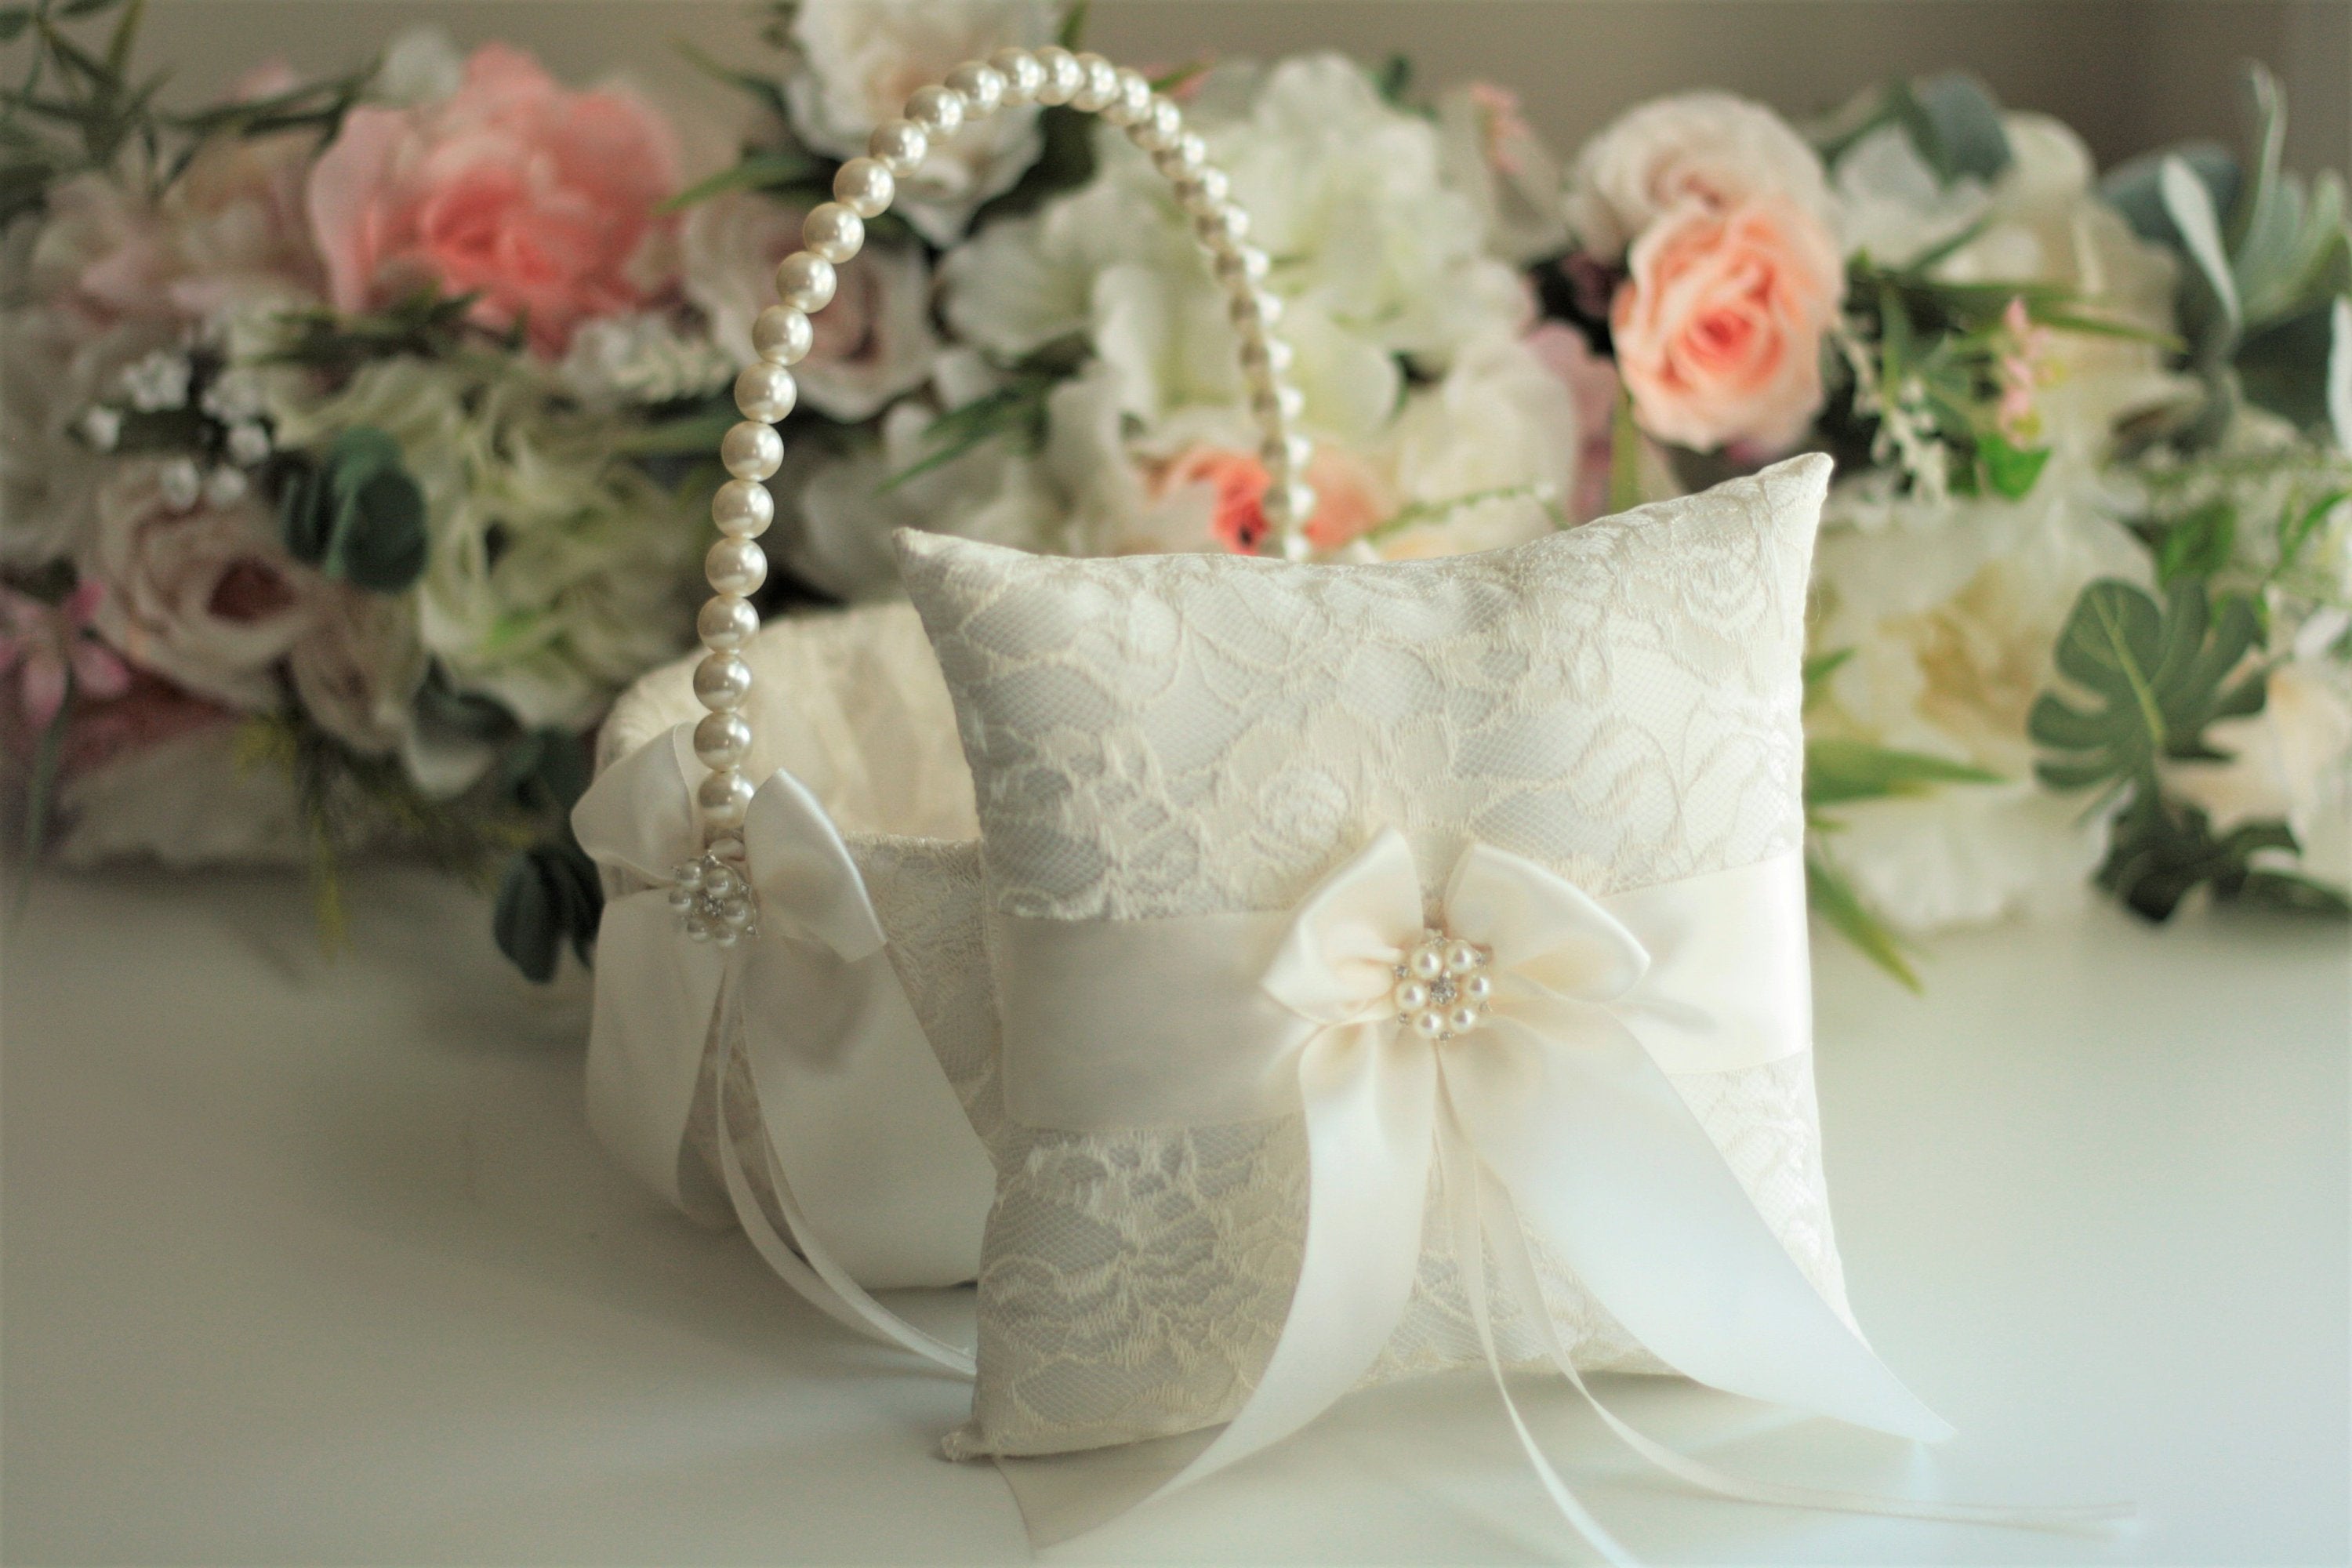 Amazon.com: Heart-Shaped Wedding Ring Pillow Holder, Ring Bearer Cushion,  Floral Rhinestone Flower Rose Ring Bearer Pillow Box Jewery Case Ring Holder  for Wedding Party Wedding Supplies Gift : Home & Kitchen